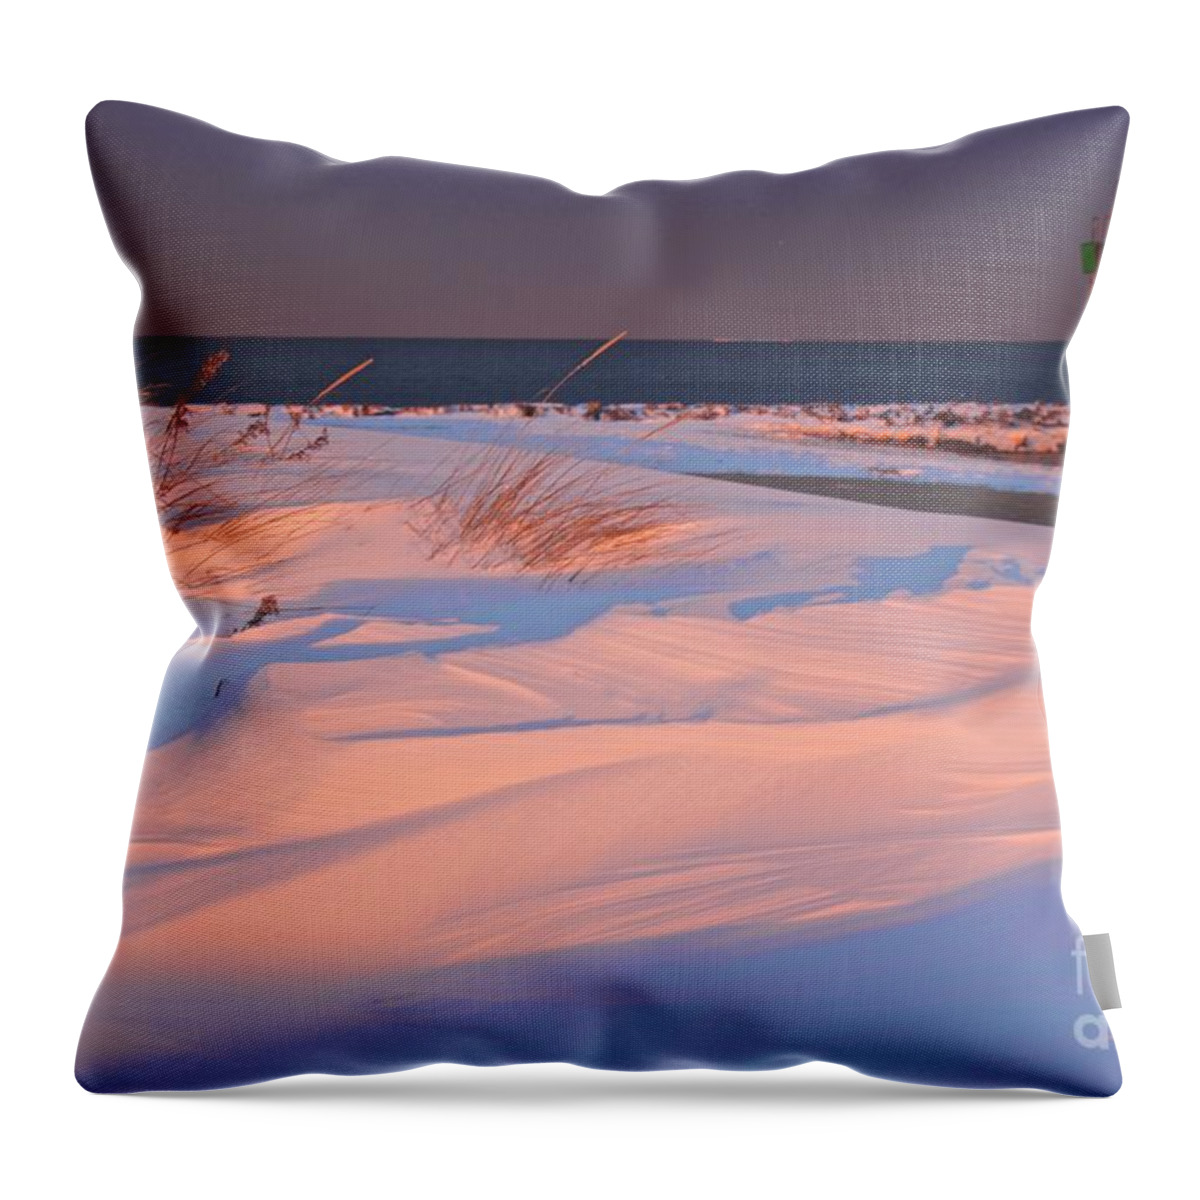 Blizzard Throw Pillow featuring the photograph Blizzard Juno Sunset by Amazing Jules